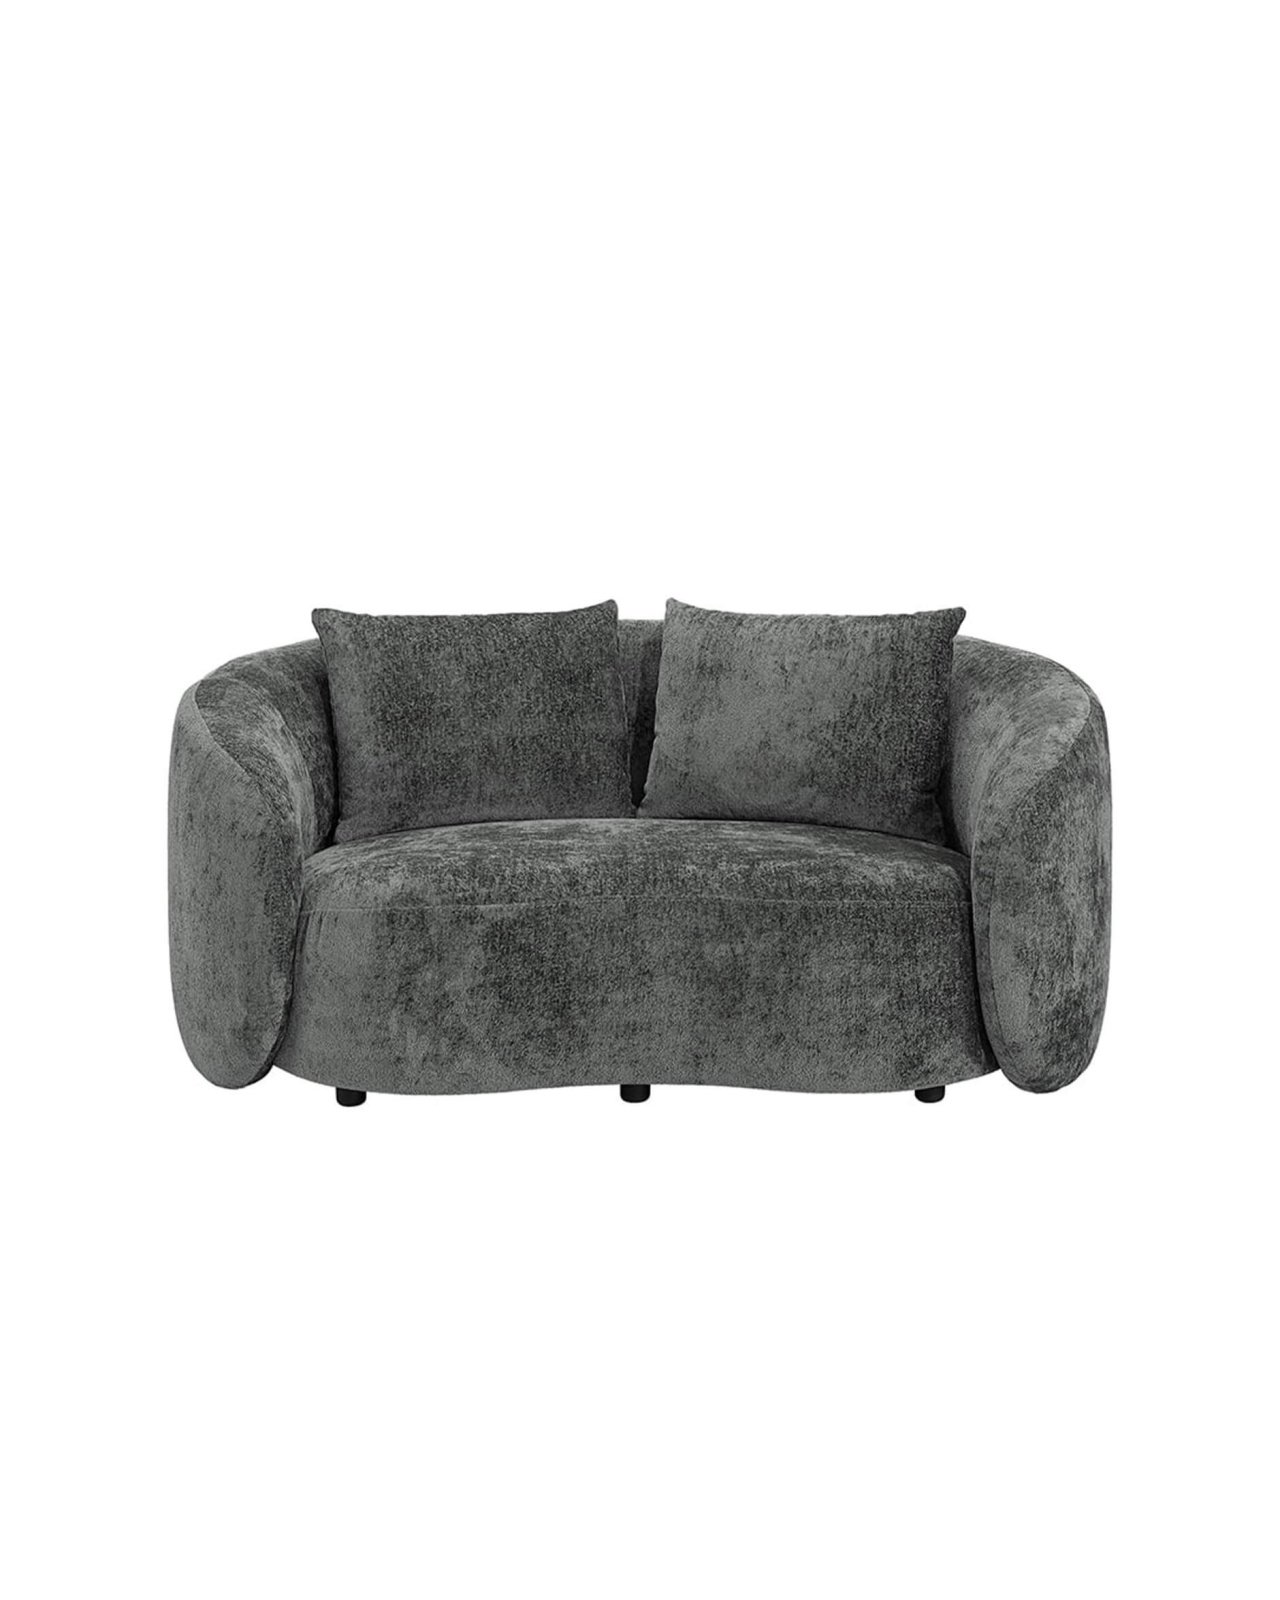 Dome loveseat moment grey